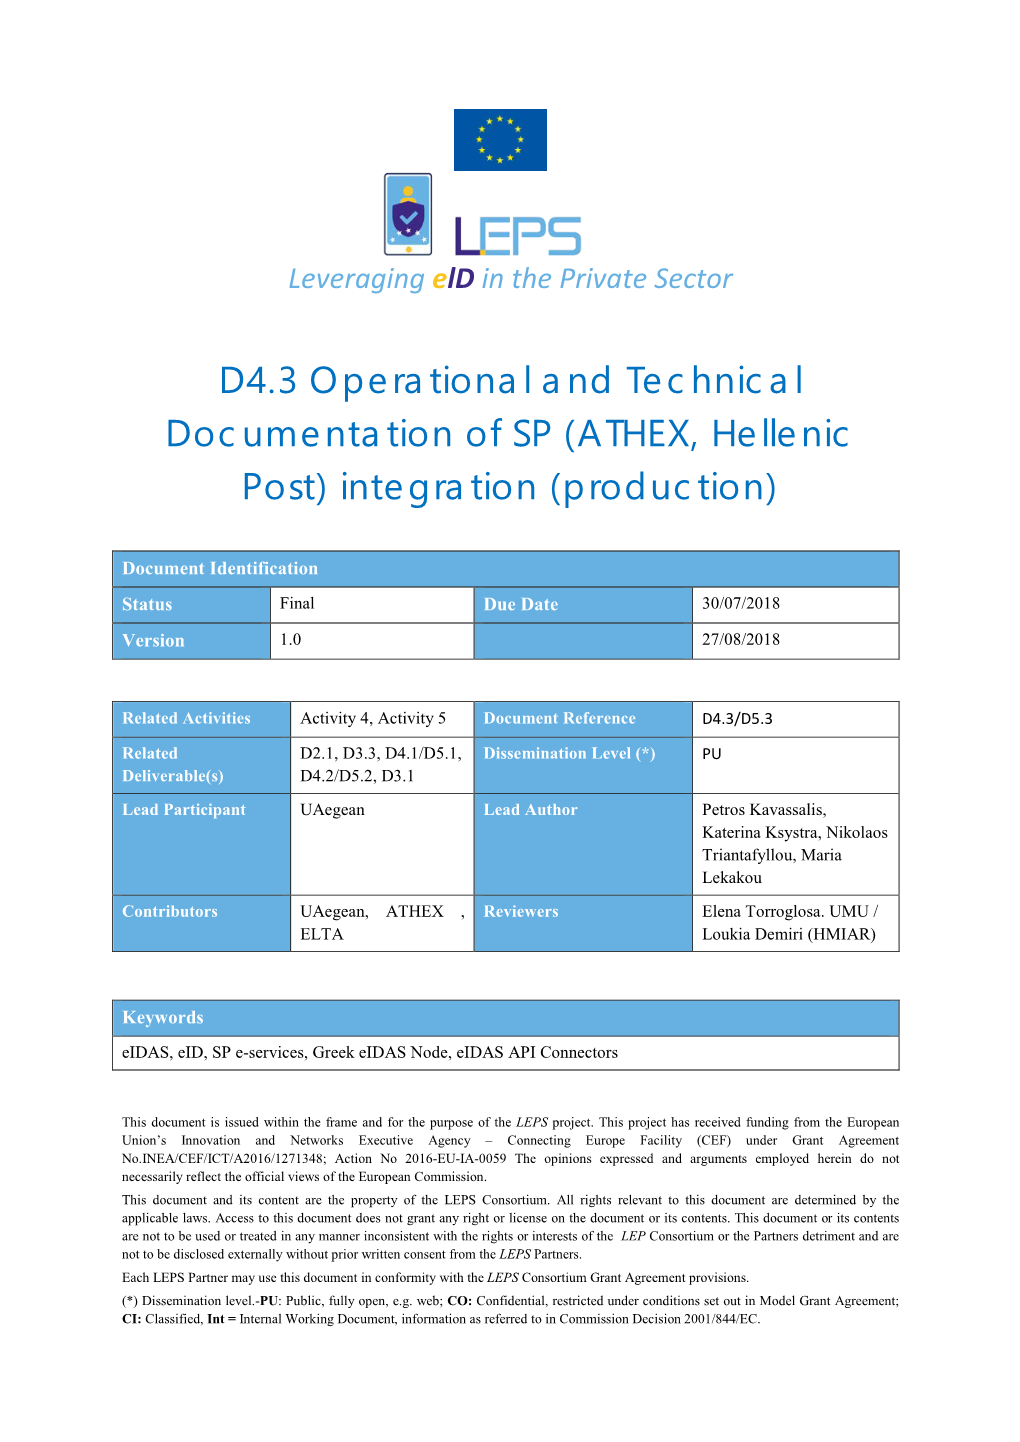 D4.3 Operational and Technical Documentation of SP (ATHEX, Hellenic Post) Integration (Production)